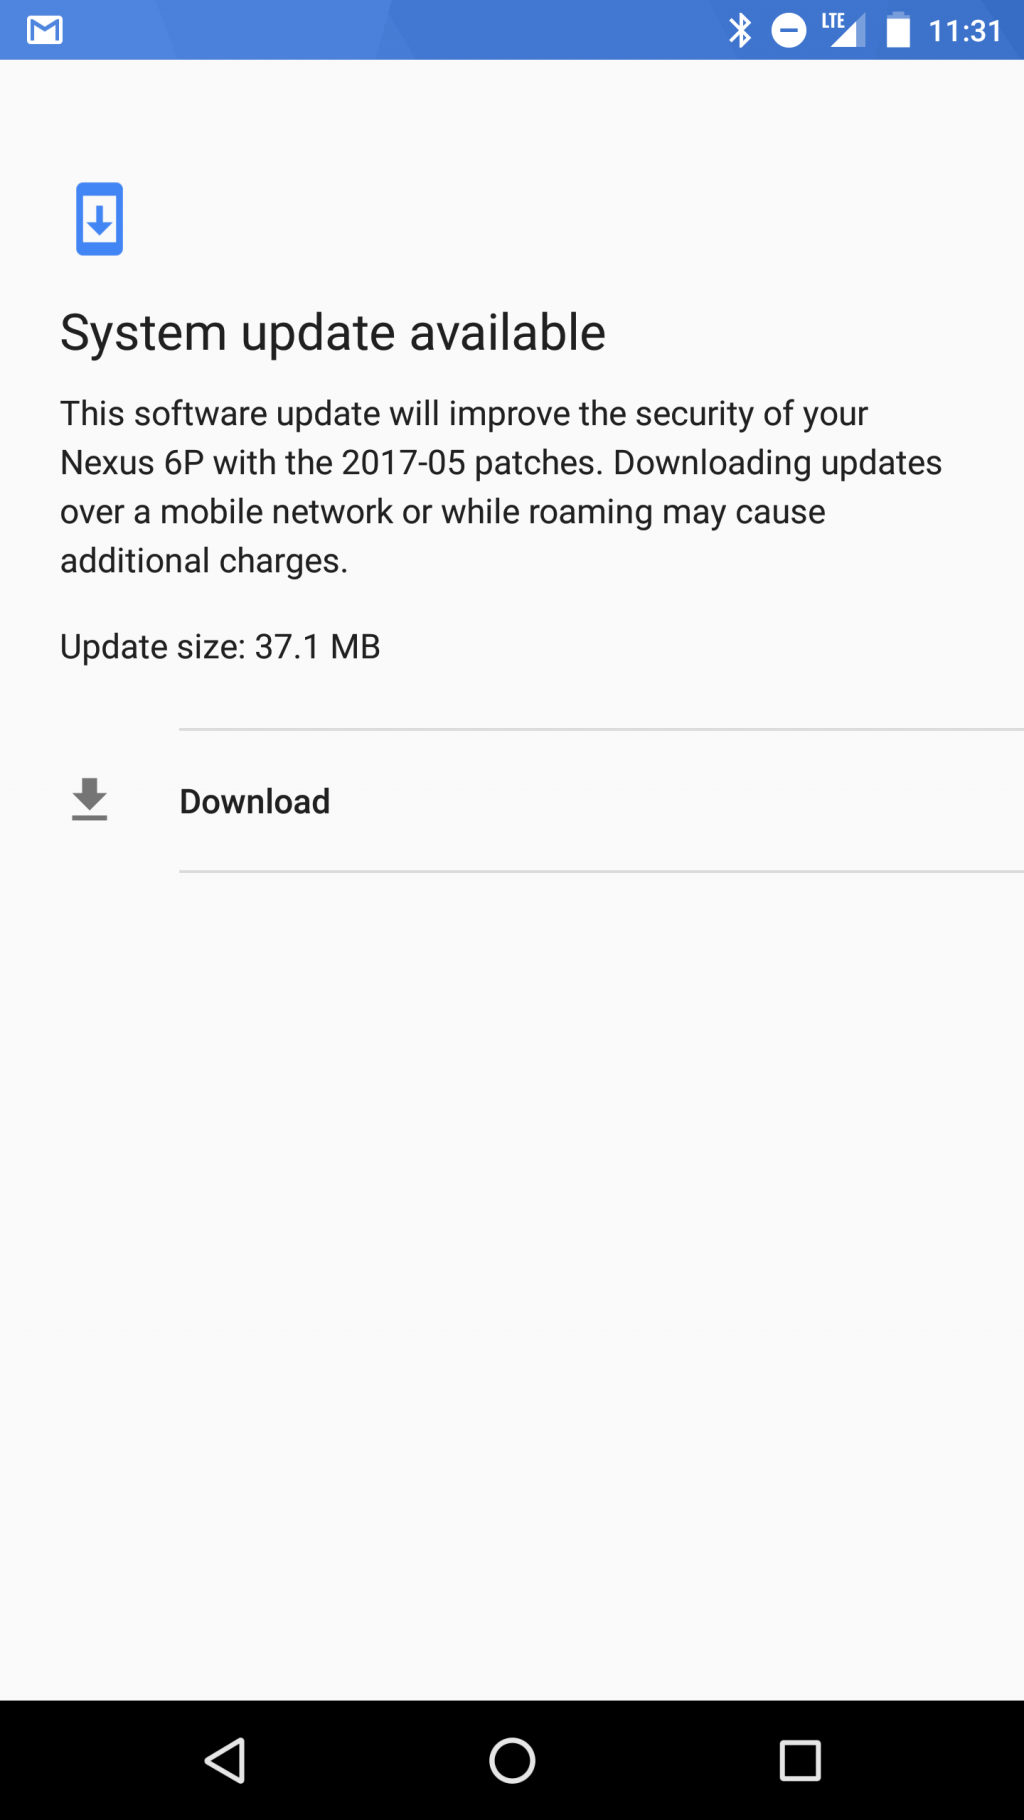 Google Releases May 2017 Android Security Patches for Nexus 6P